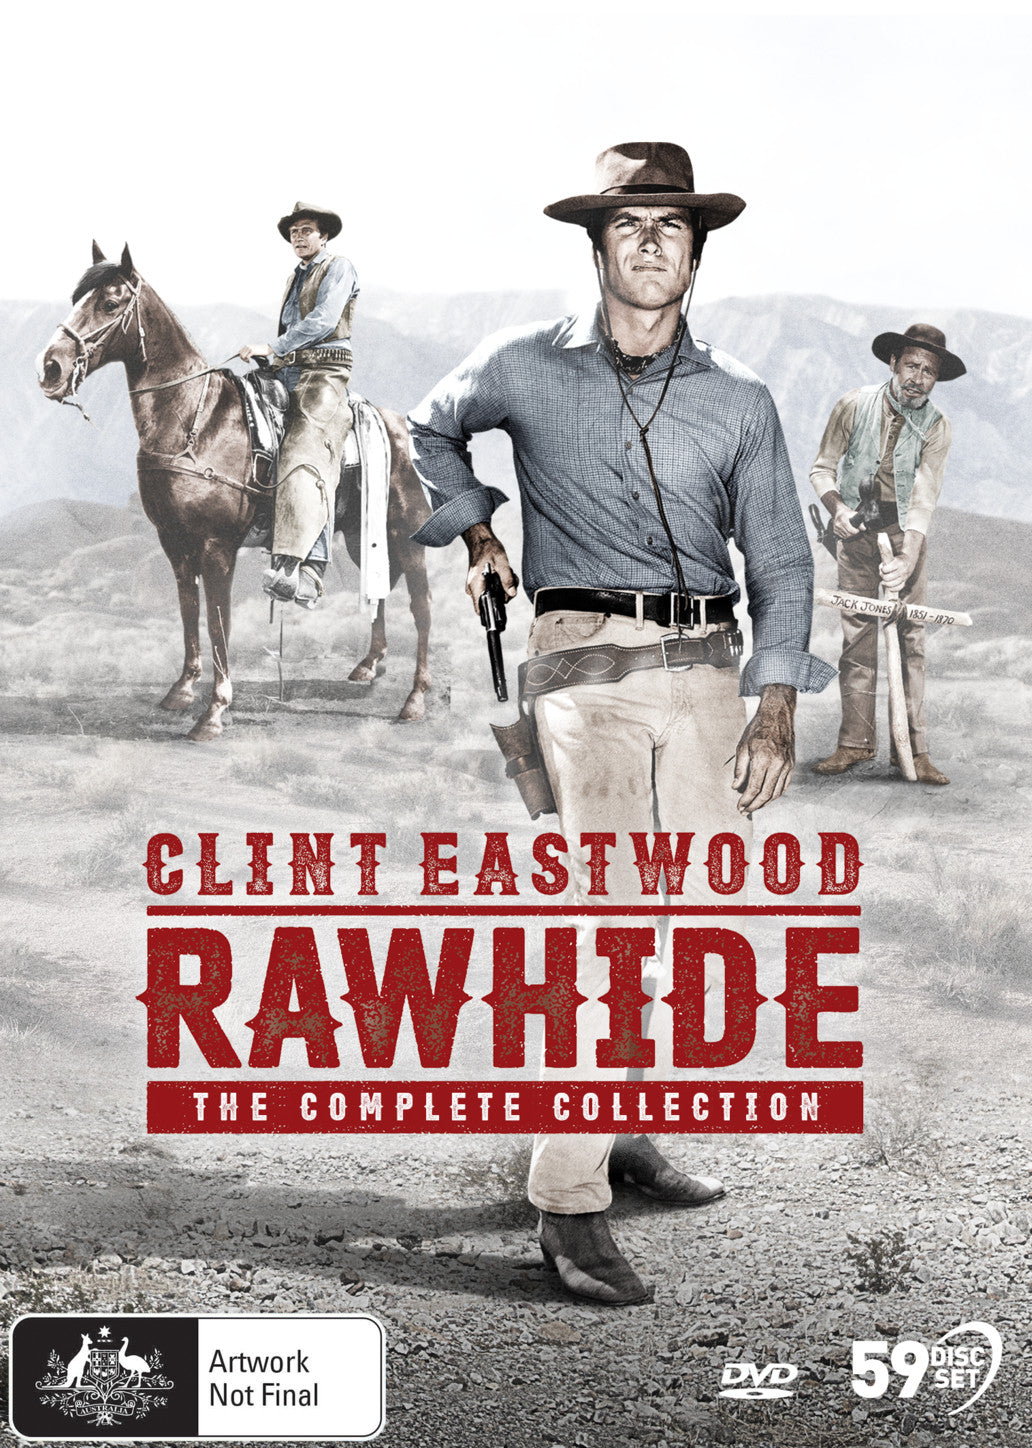 RAWHIDE: THE COMPLETE COLLECTION